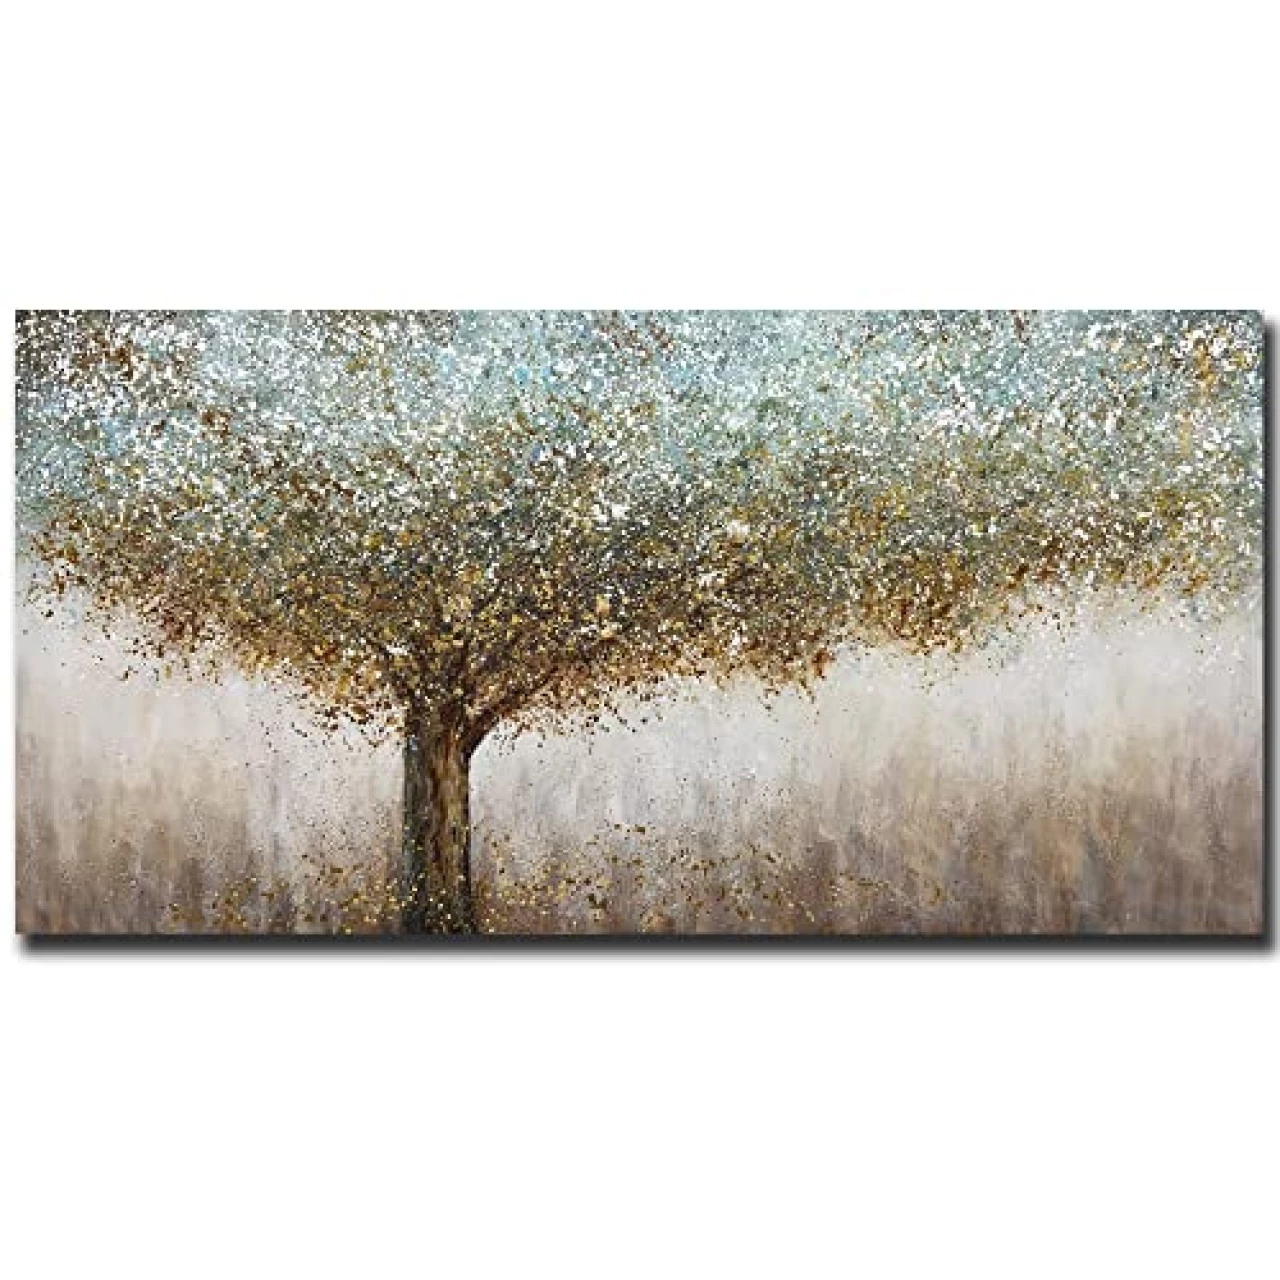 Tiancheng Art 30x60 inch Abstract Canvas Art 100% Hand-Painted Oil Painting Wall Art Pieces Framed Canvas Paintings Contemporary Artwork Decoration